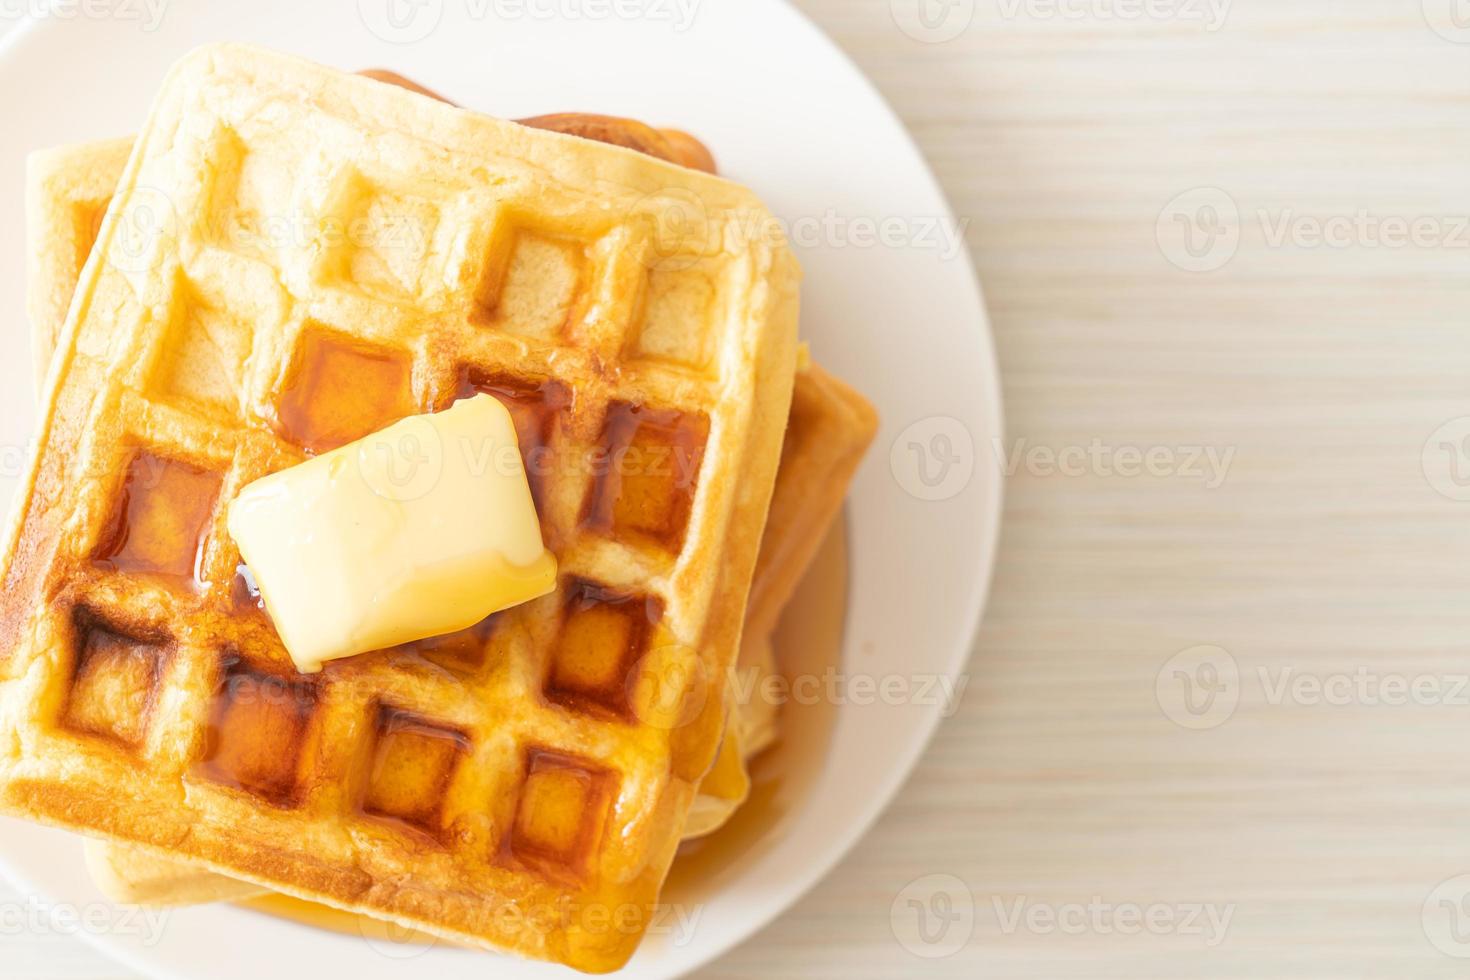 Waffle stack with butter and honey photo